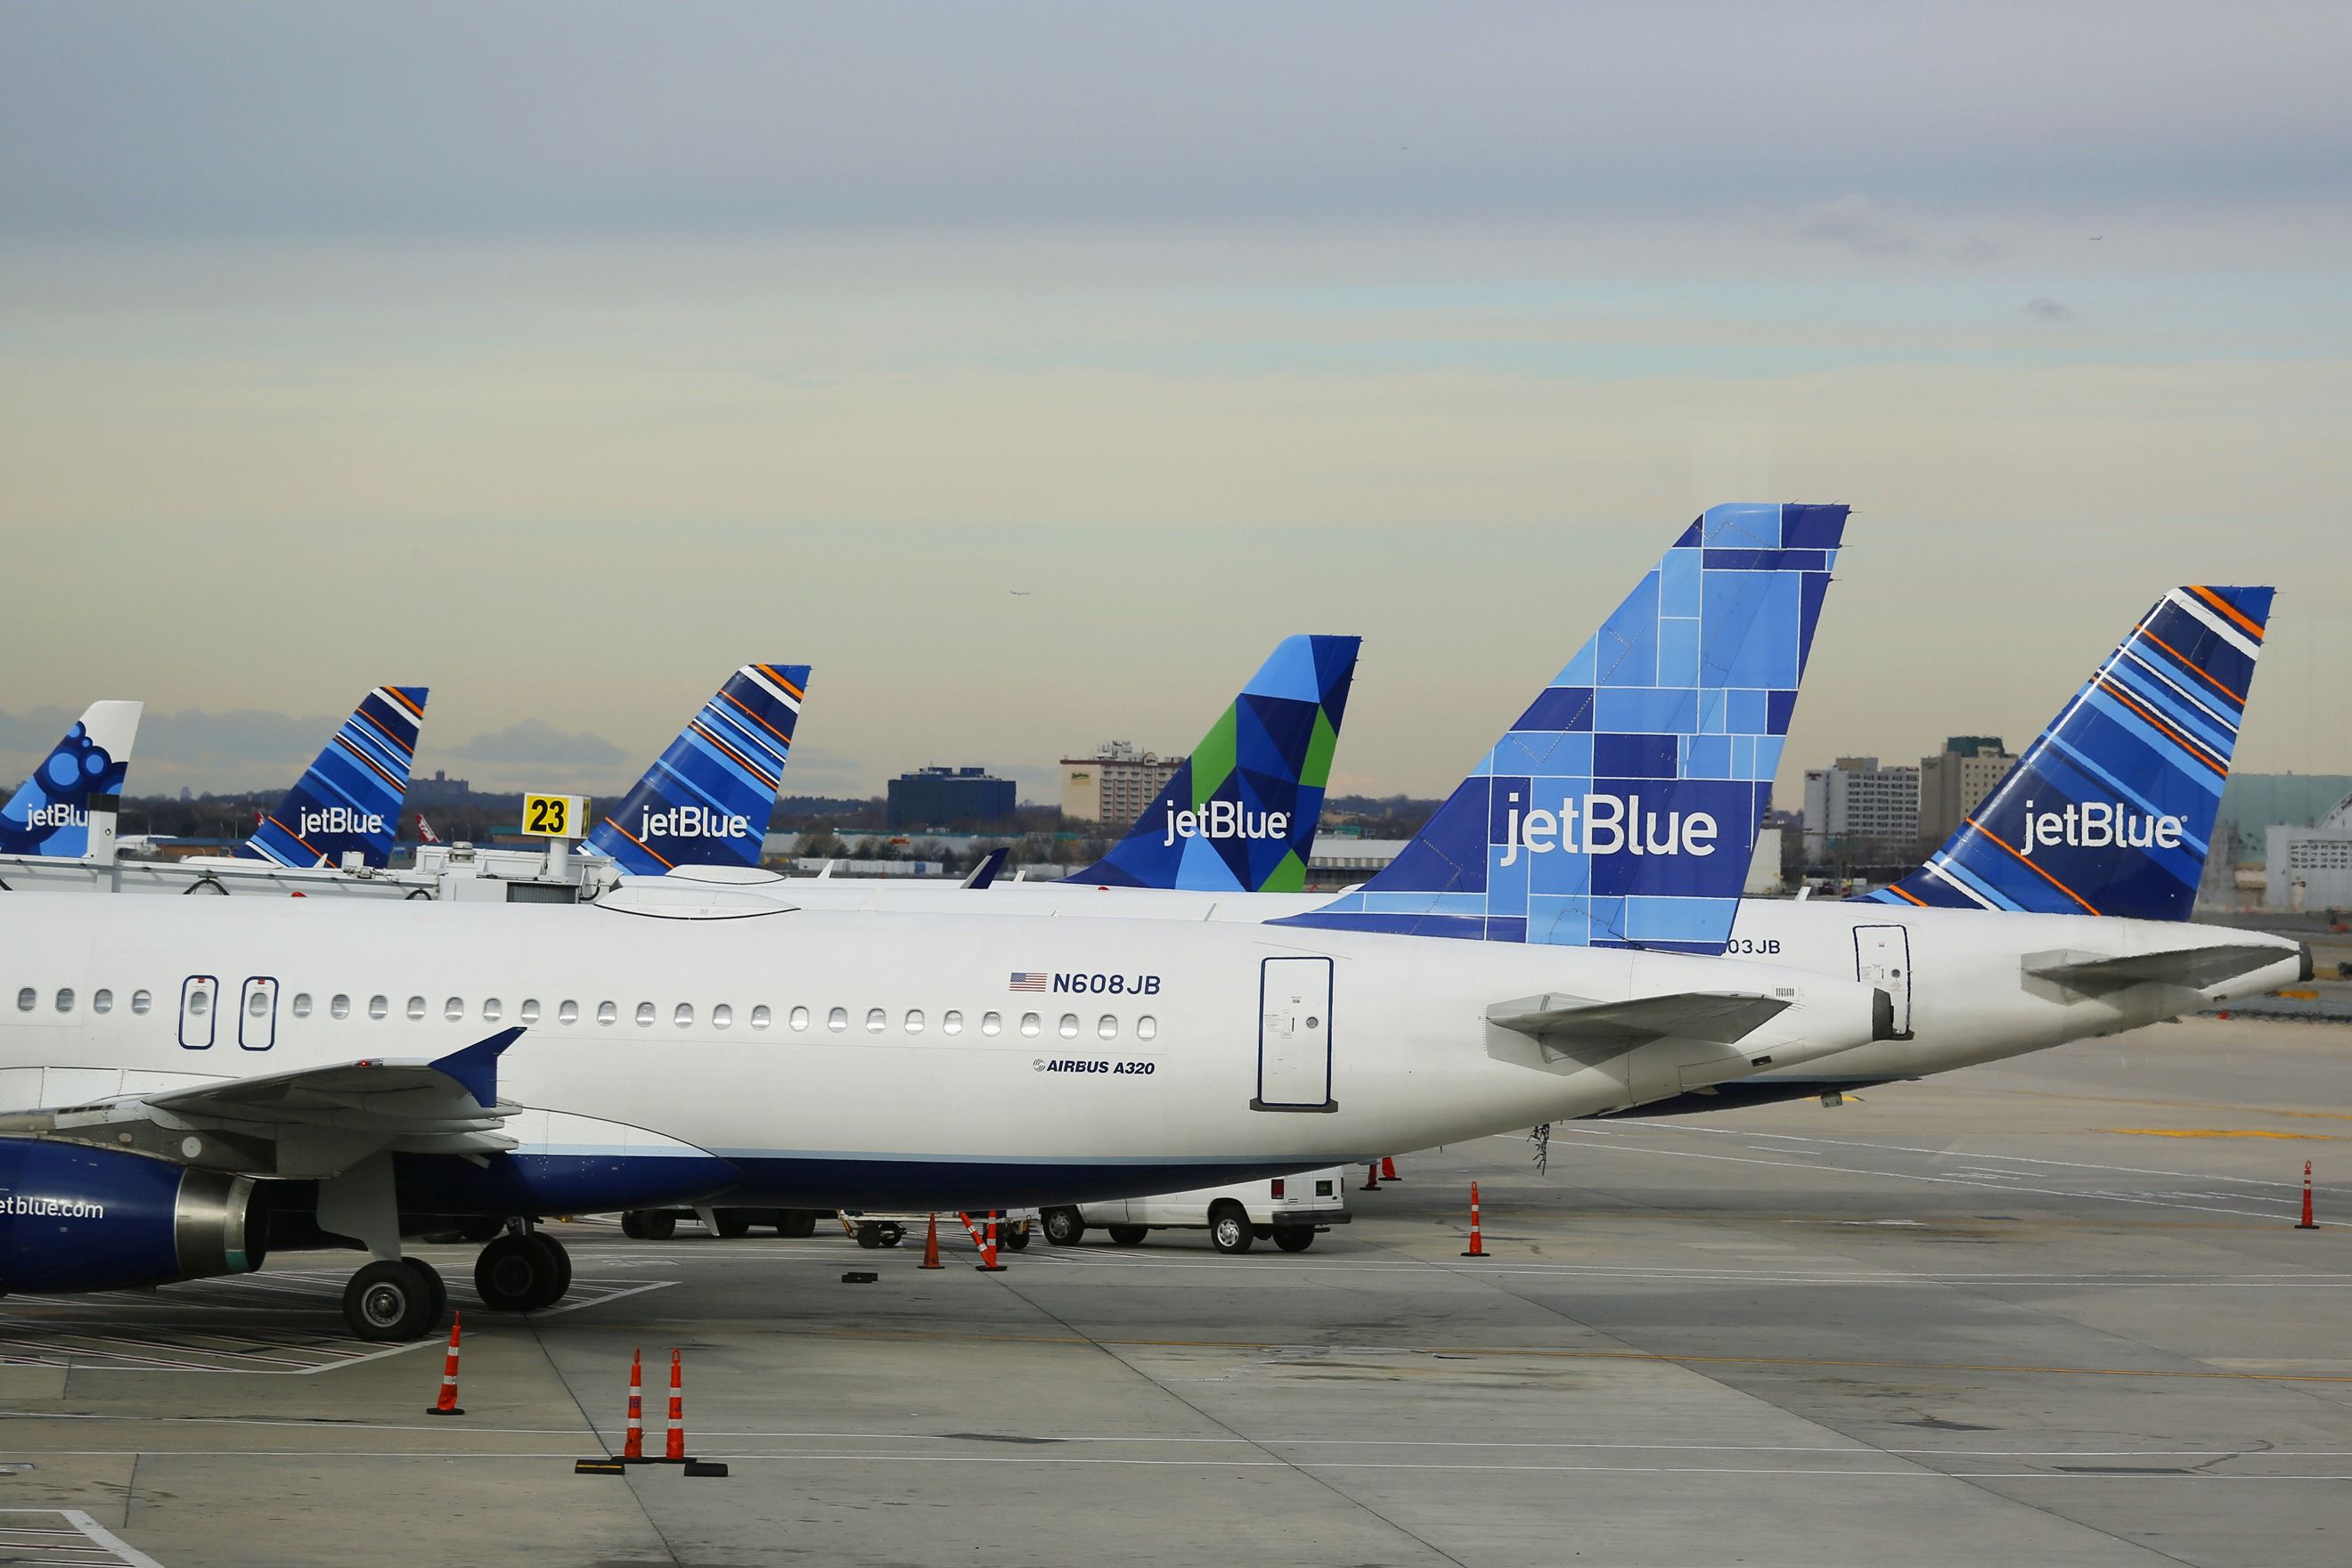 Several JetBlue Airbus A320 aircraft parked on the apron at gates at New York JFK Airport.